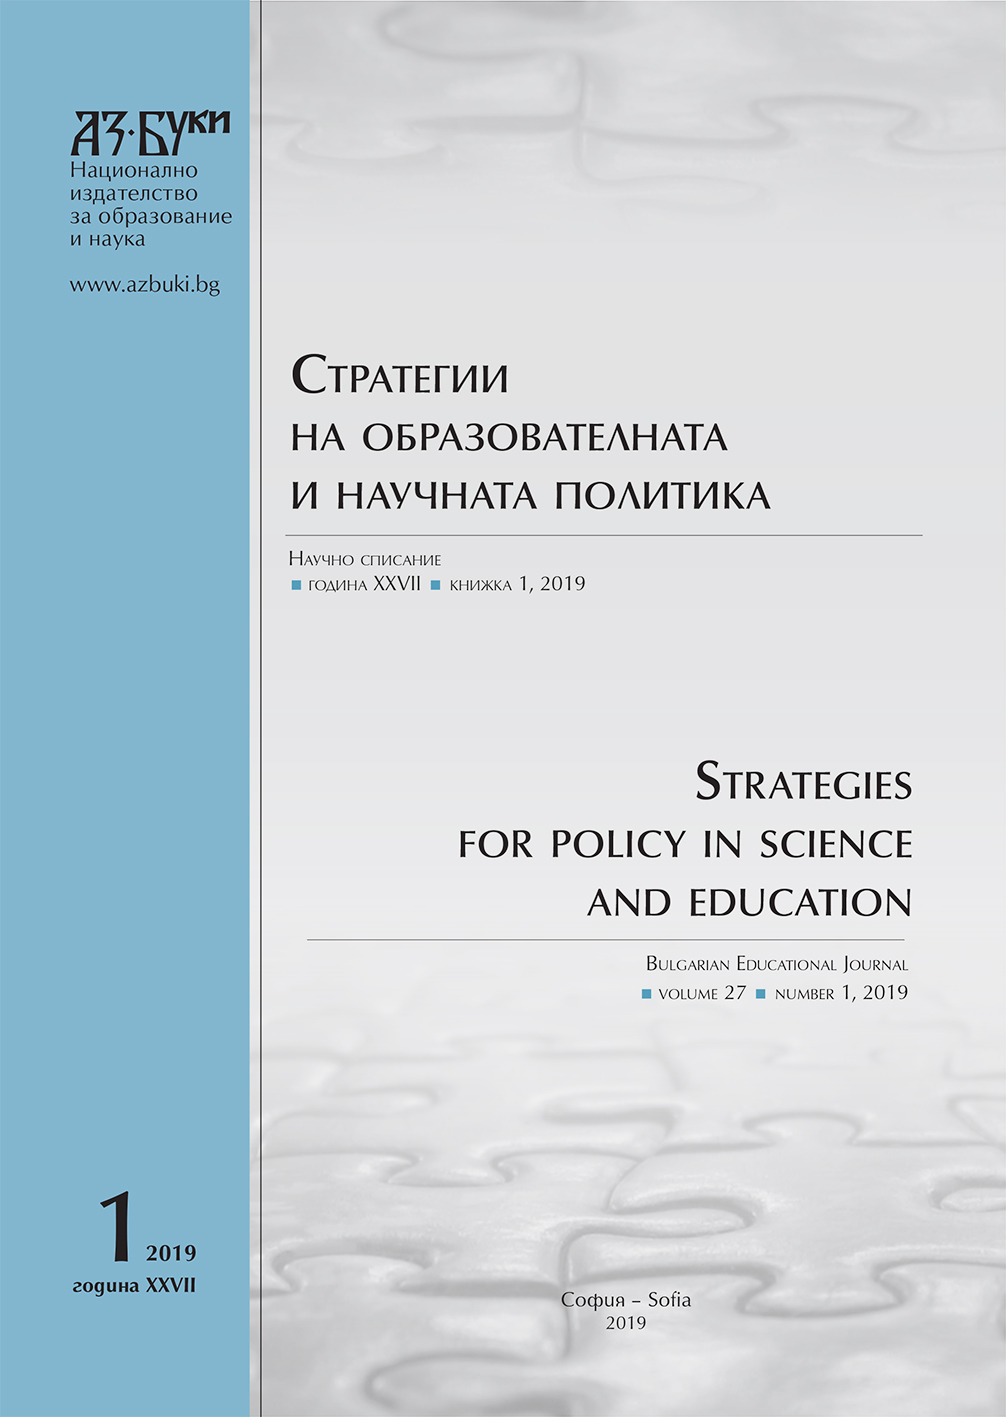 Prestigious Awards for Members of the Editorial Board of Strategies for Policy in Science and Education Journal Cover Image